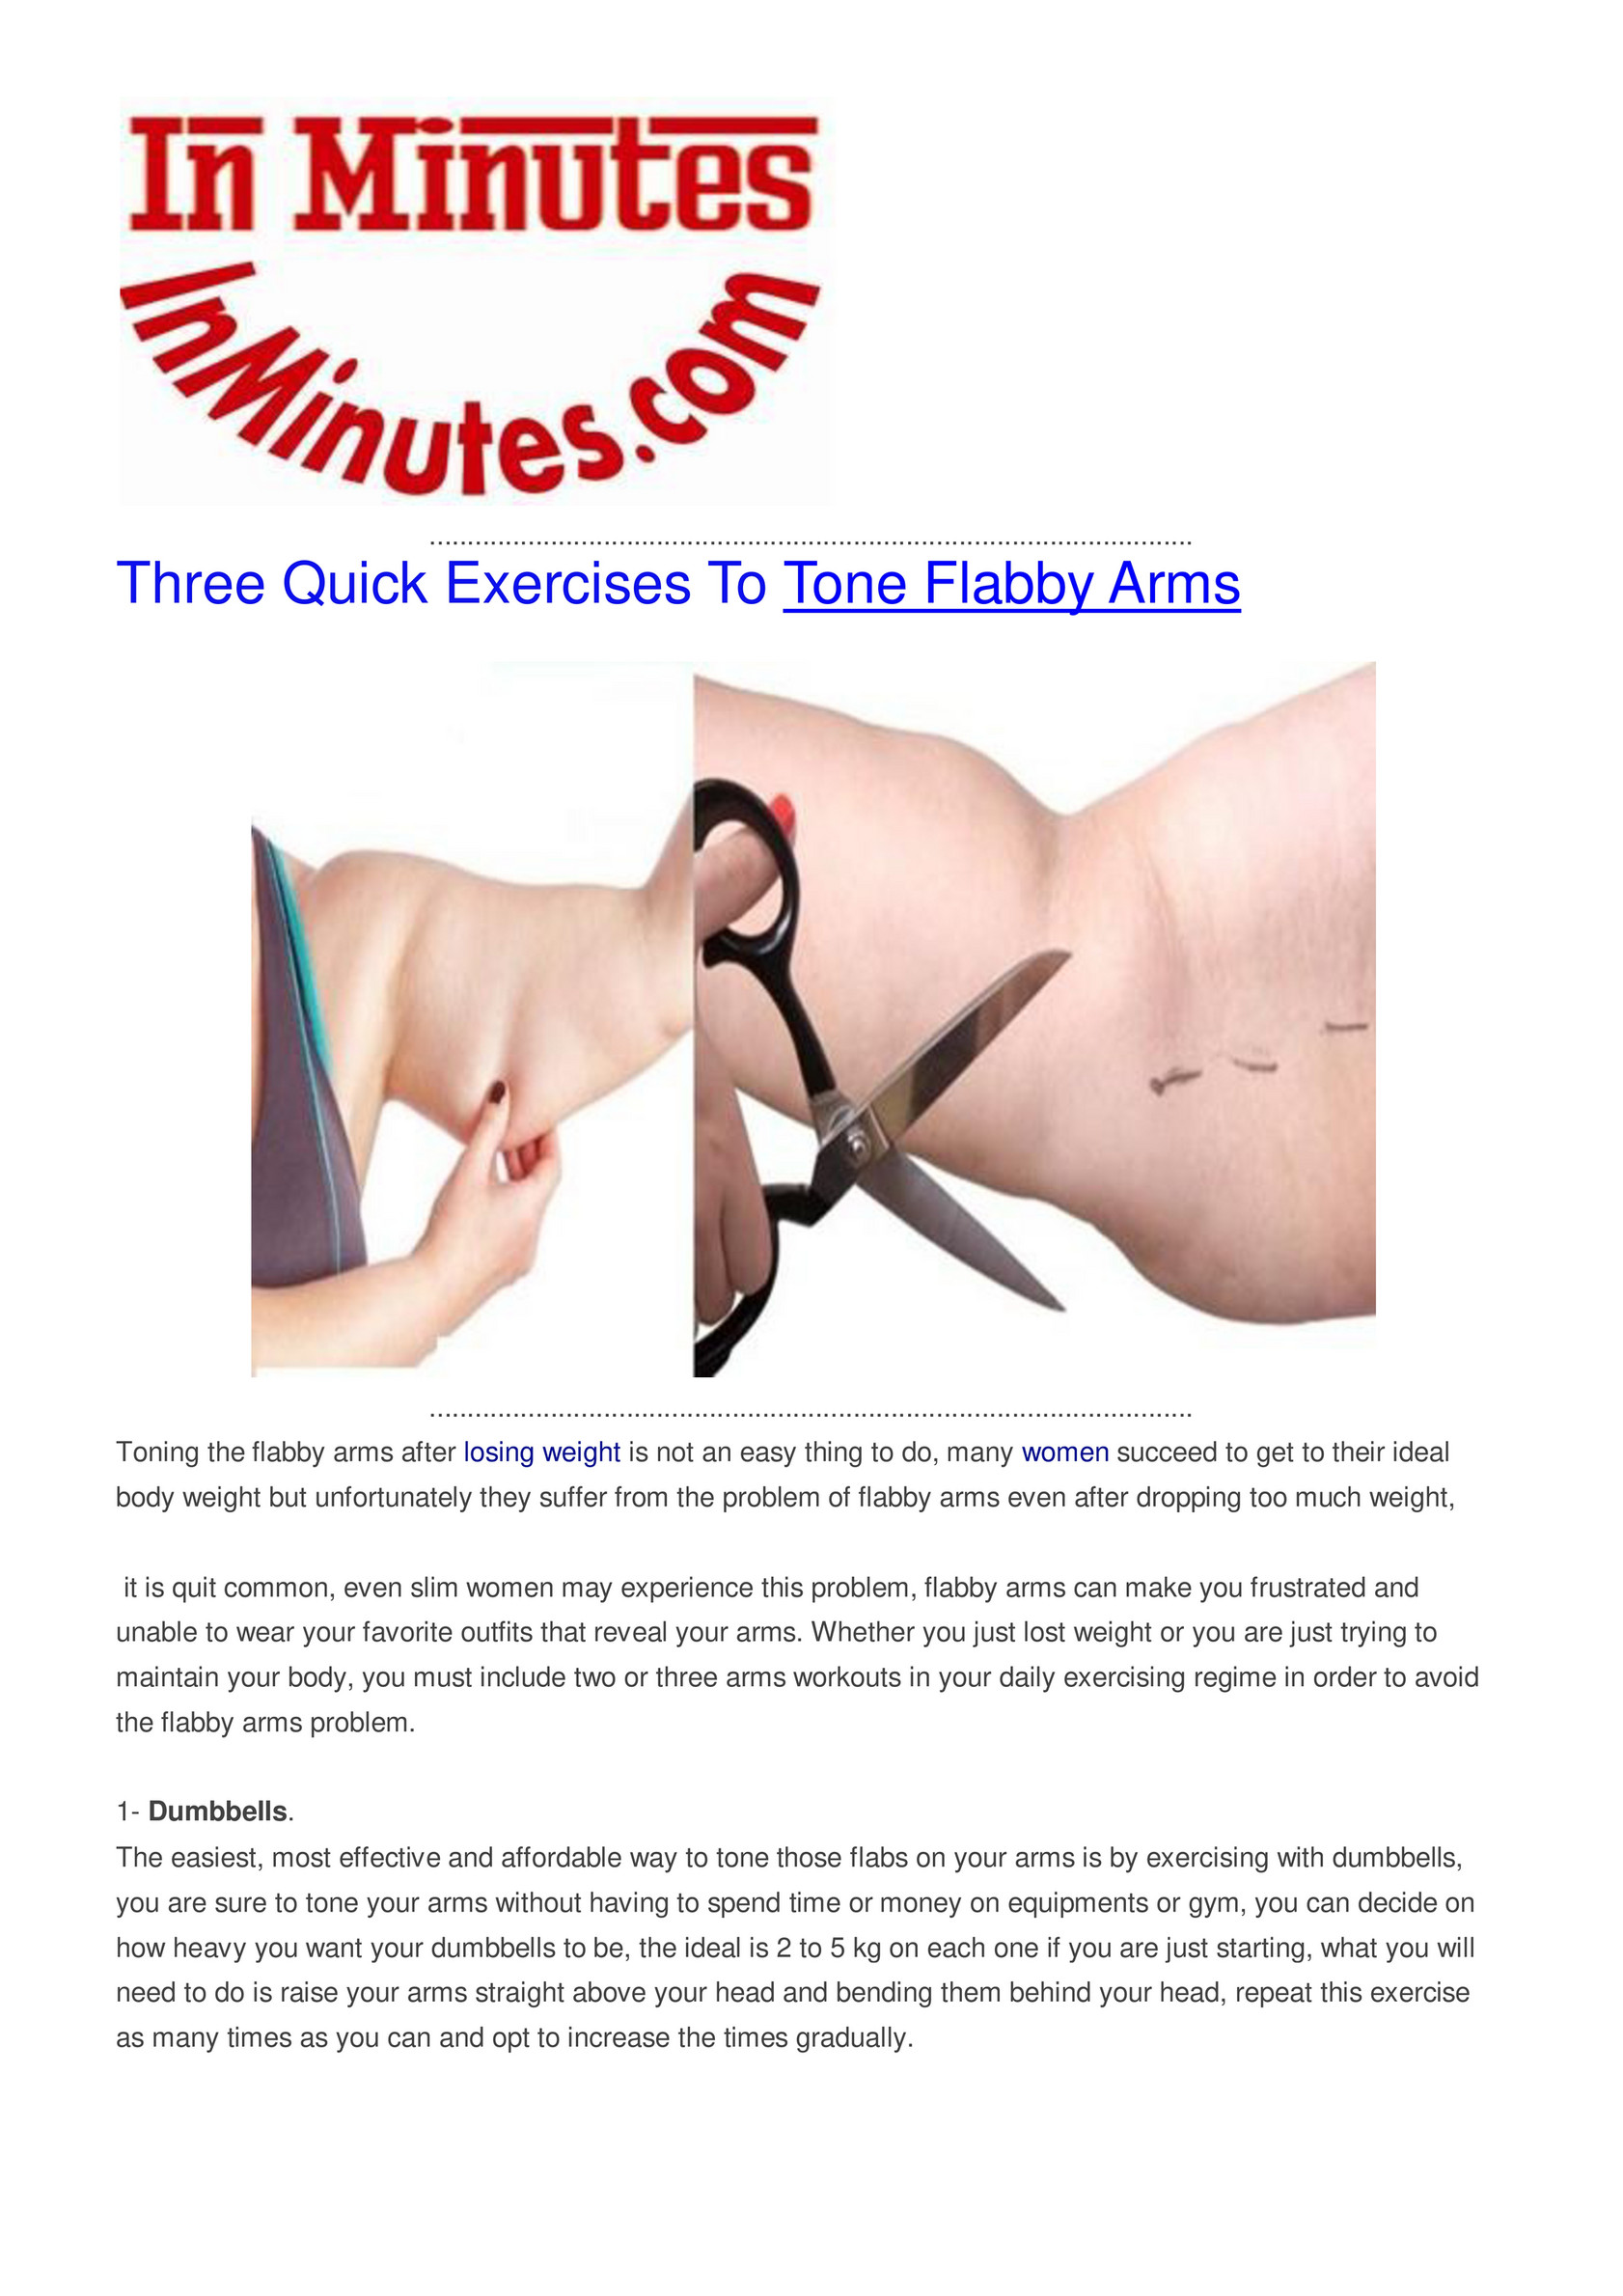 My publications - Three Quick Exercises To Tone Flabby Arms - Page